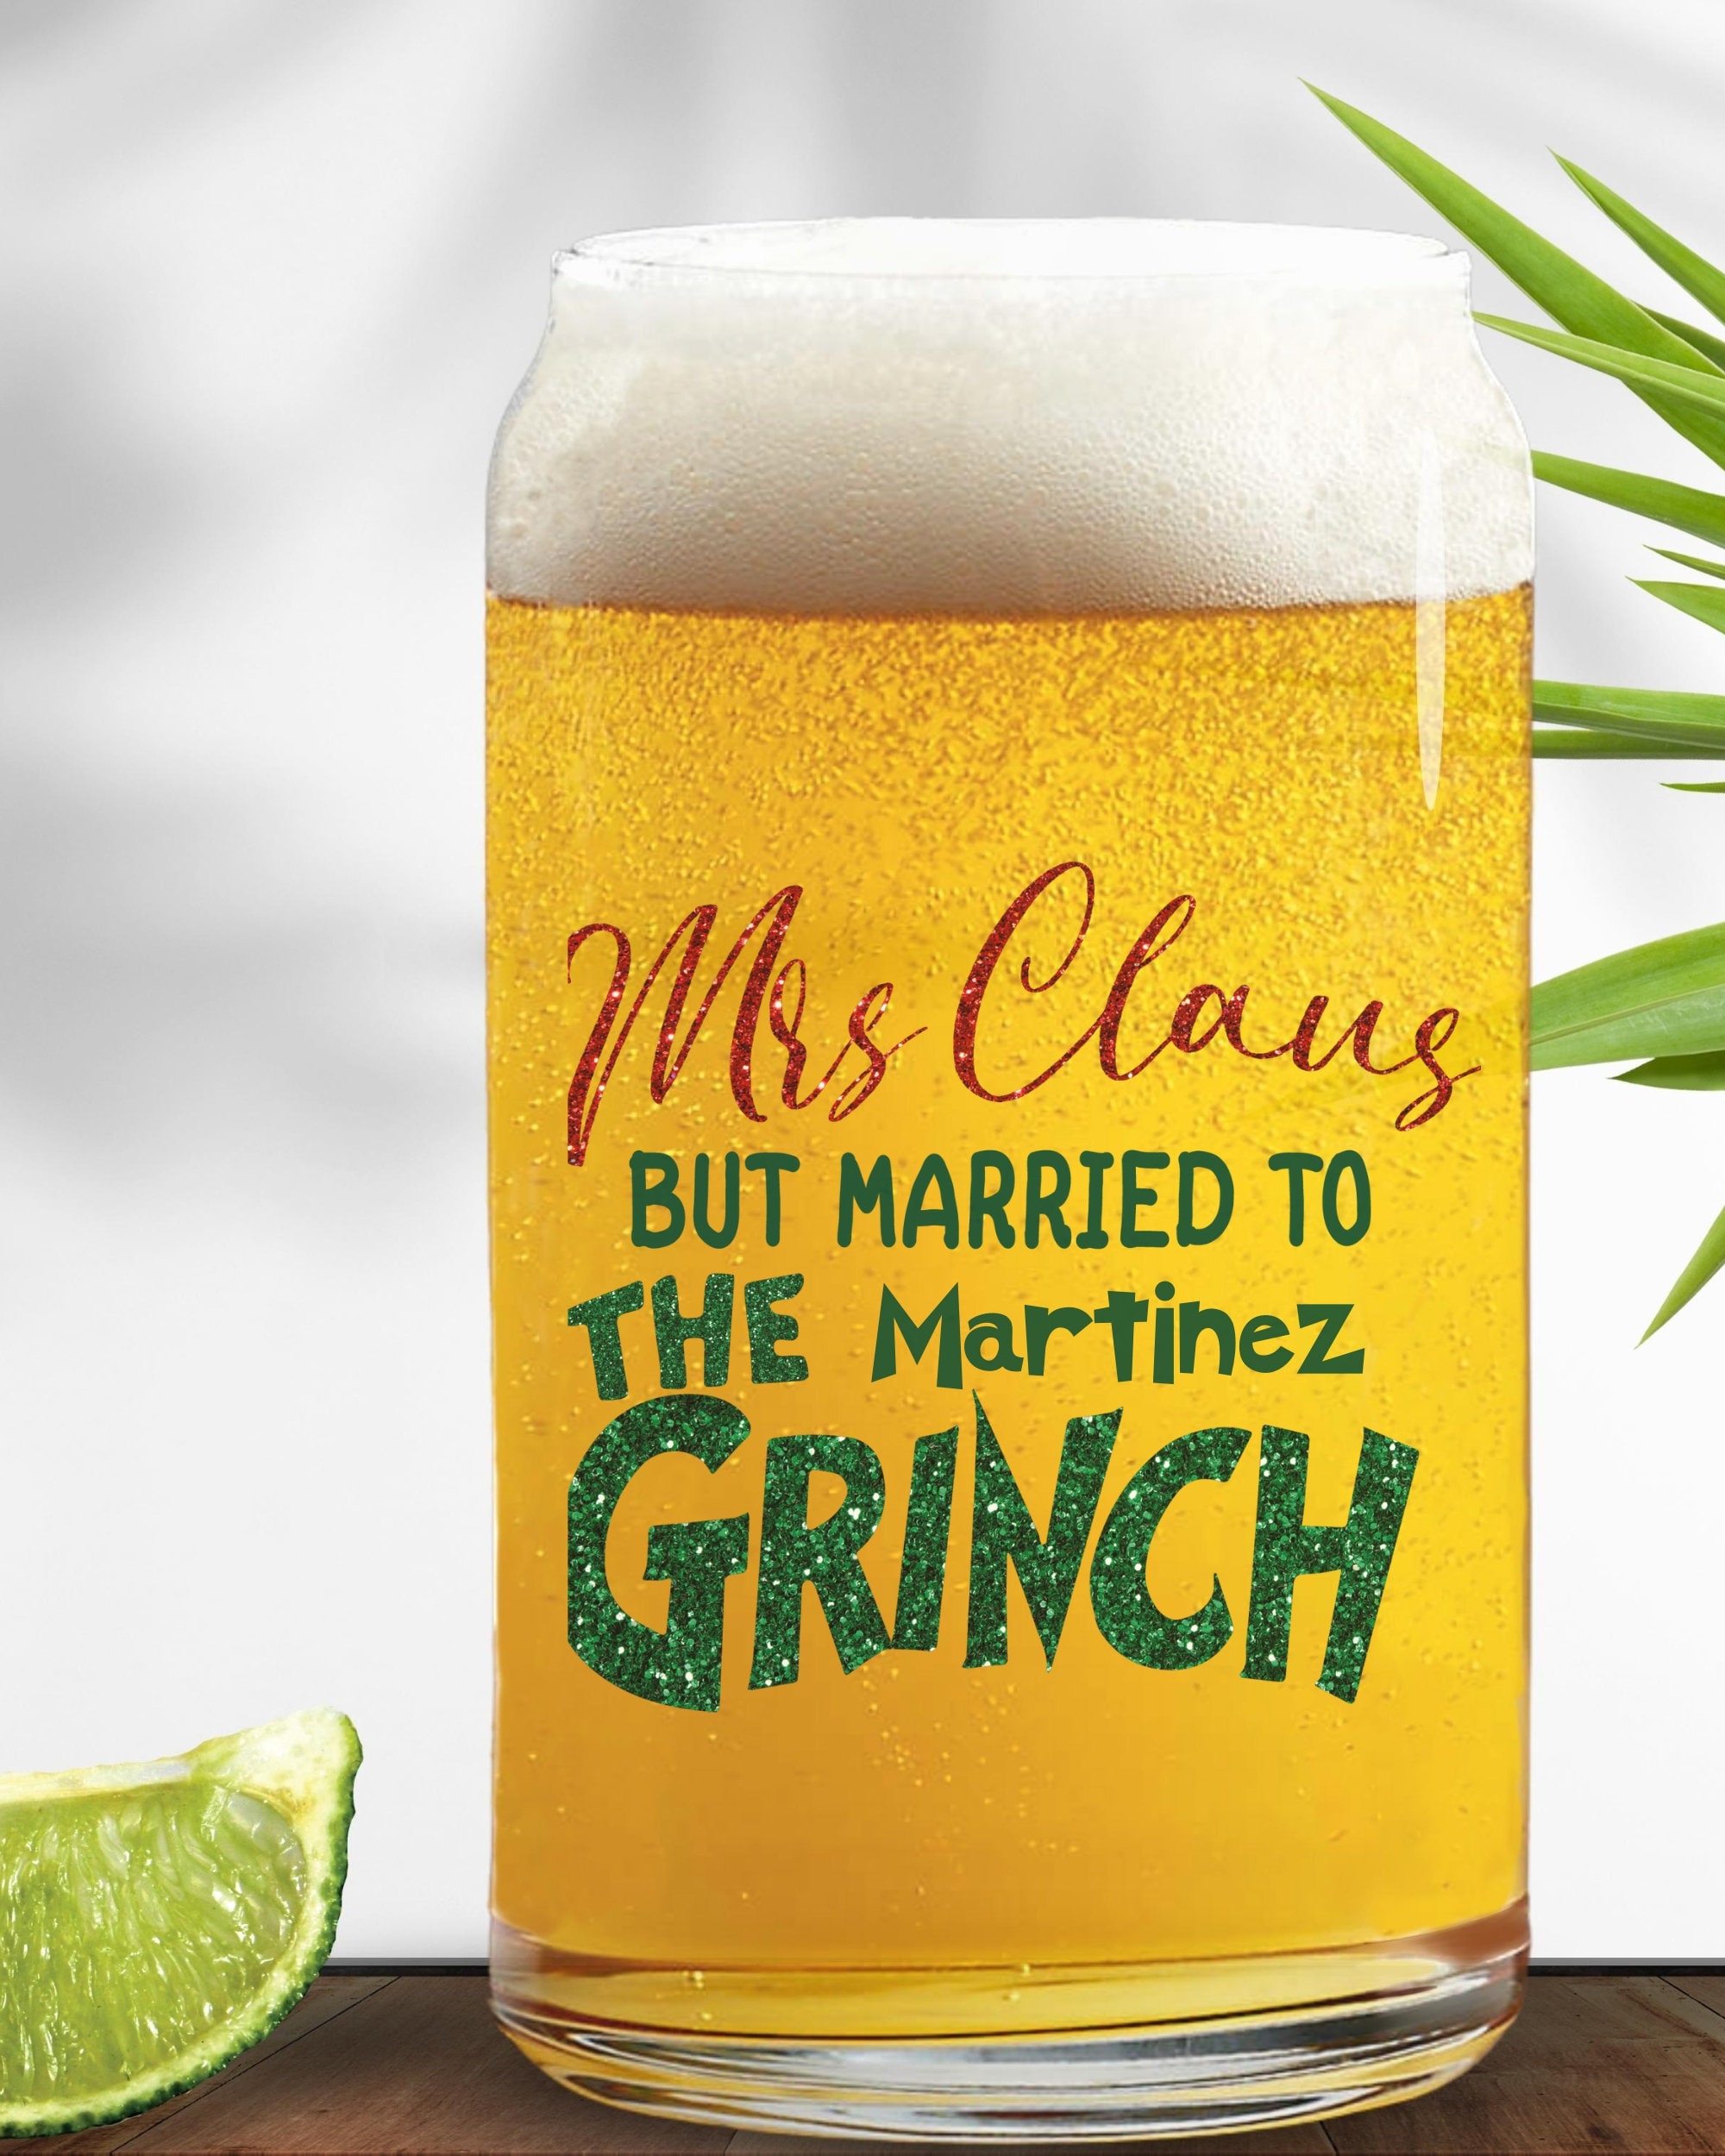 16 oz Mrs. Claus but Married to the Grinch Frosted Tumbler with